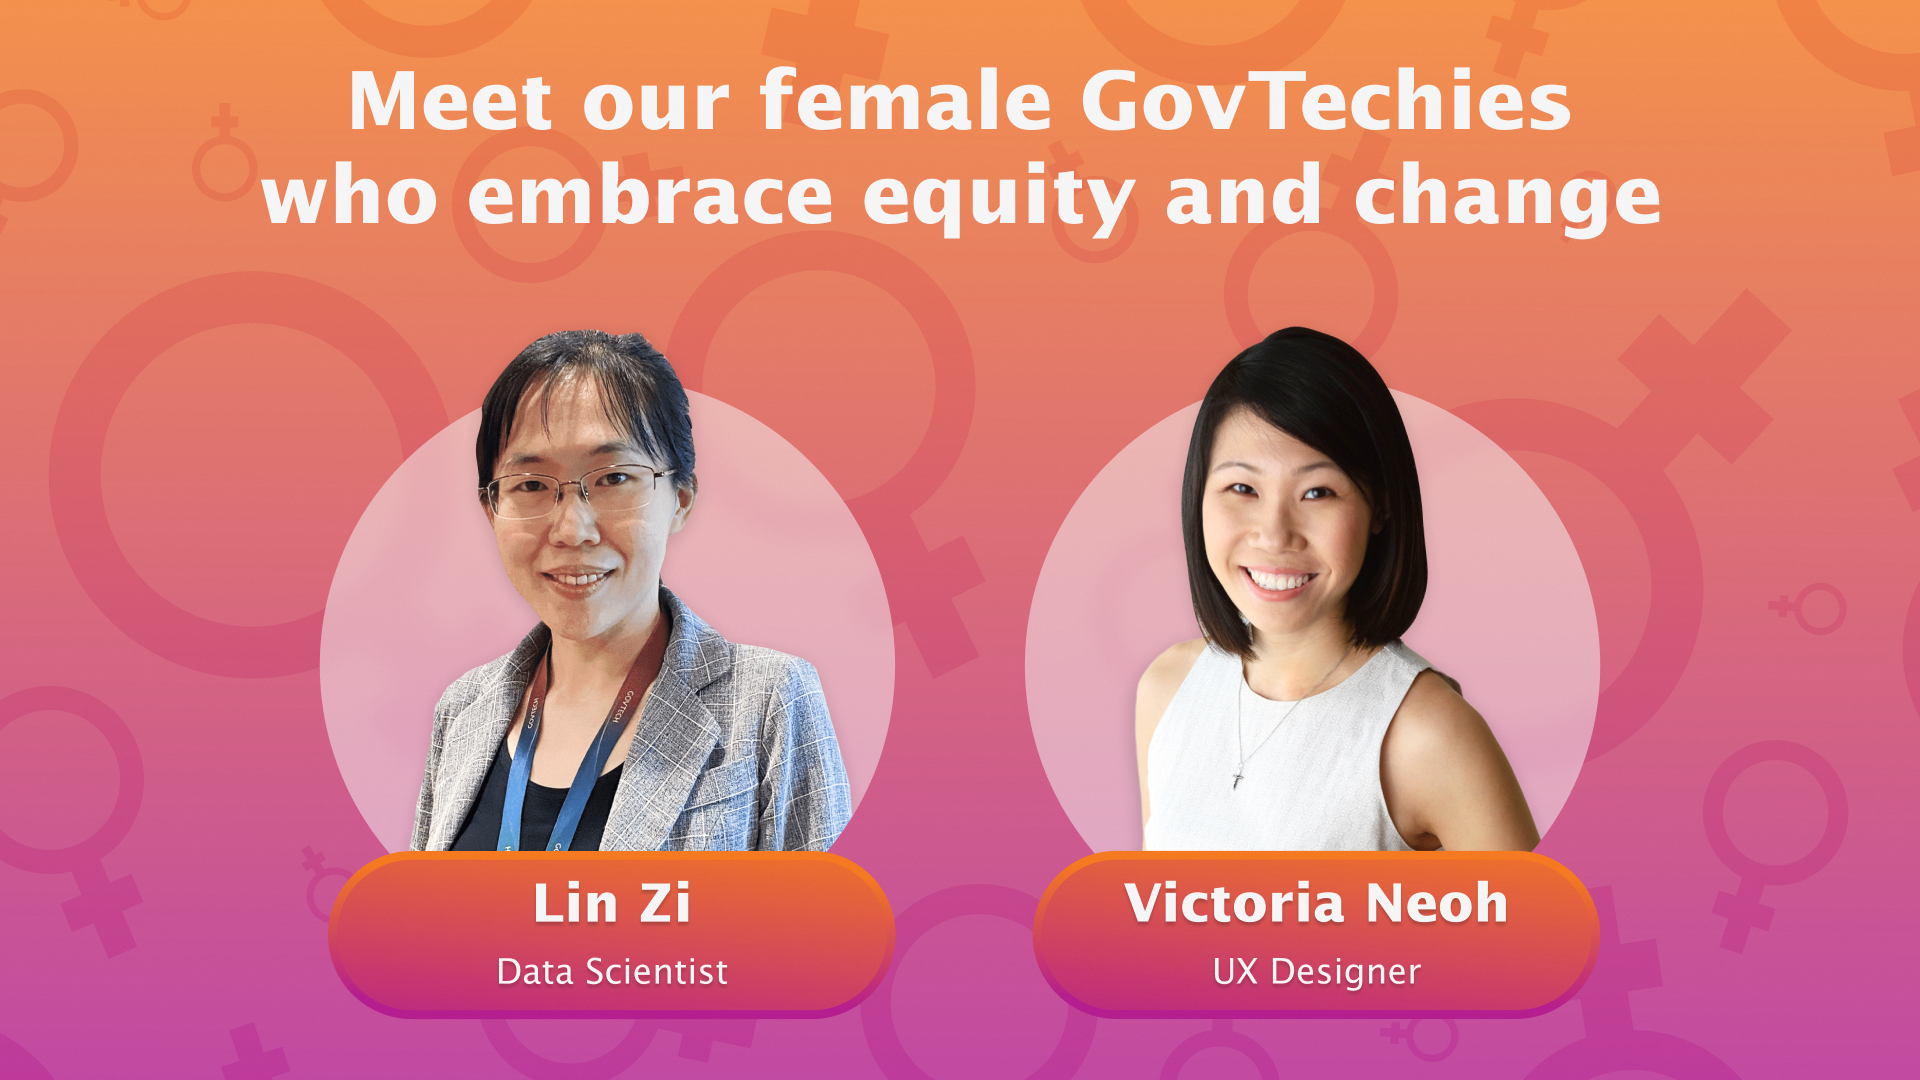 Our female GovTechies who made a career switch